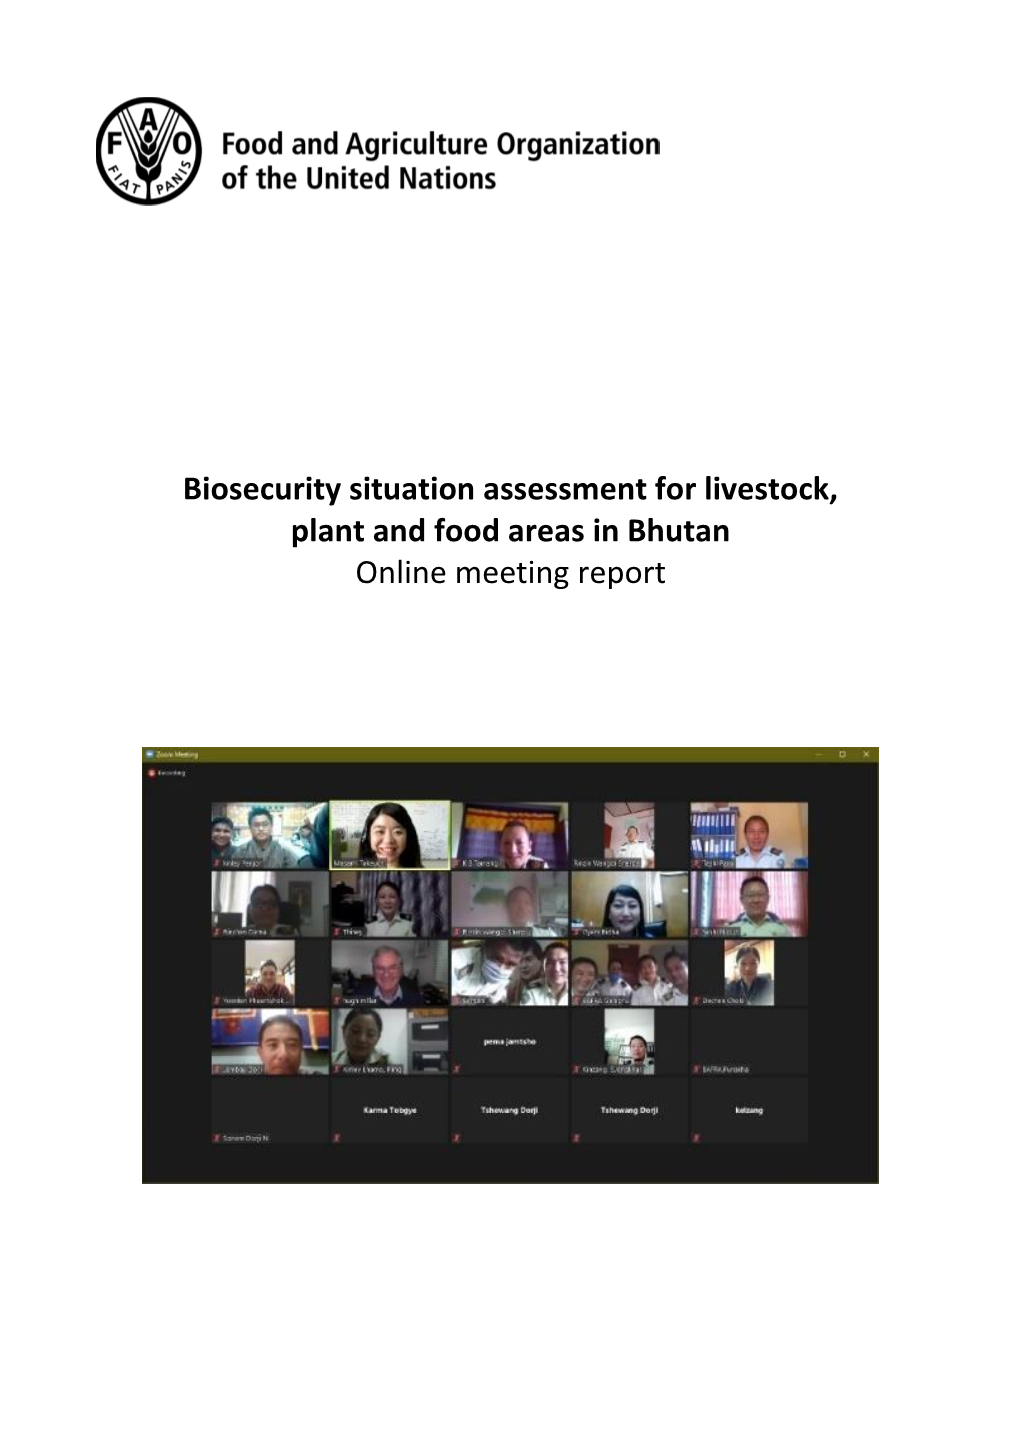 Biosecurity Situation Assessment for Livestock, Plant and Food Areas in Bhutan Online Meeting Report